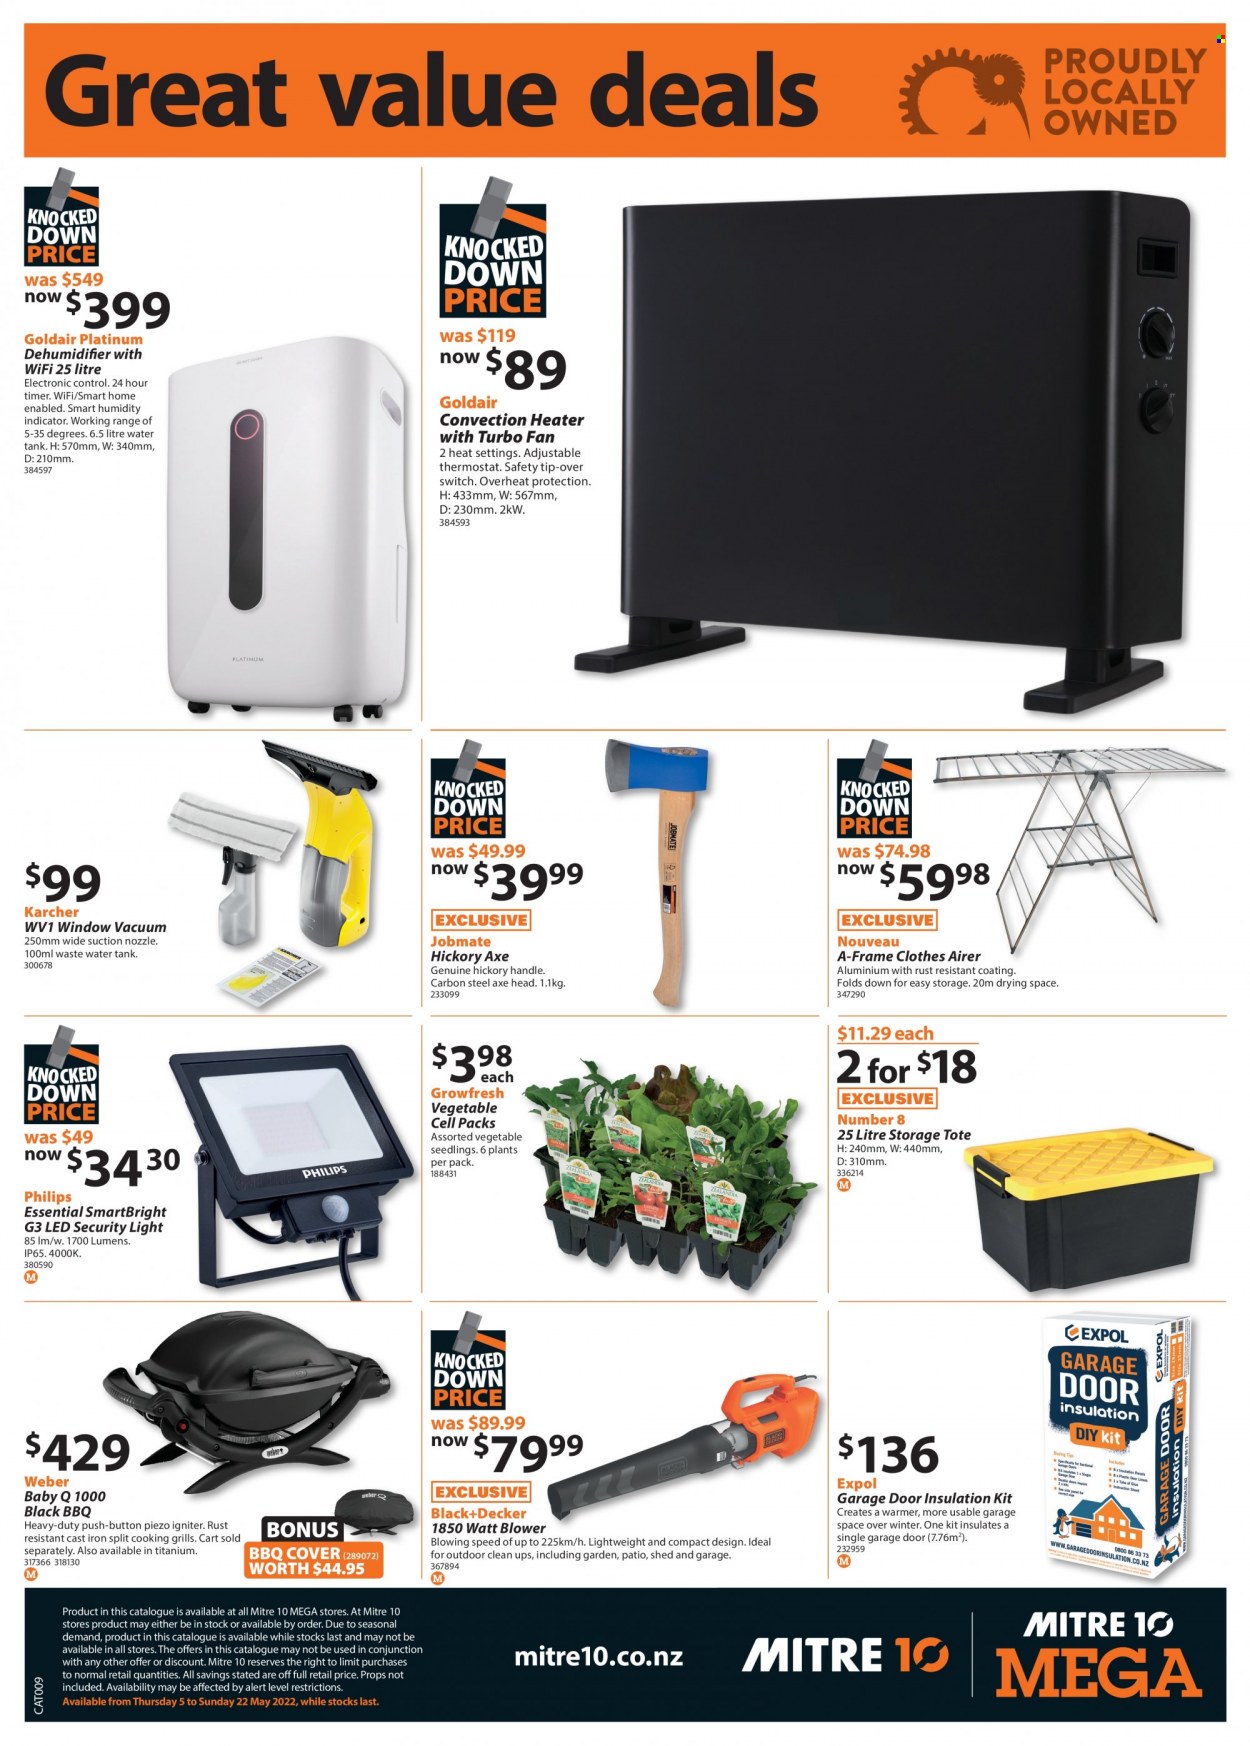 thumbnail - Mitre 10 mailer - 05.05.2022 - 22.05.2022 - Sales products - water tank, Philips, tank, Black & Decker, blower, Axe, cart, Kärcher, storage tote, shed, Weber. Page 24.